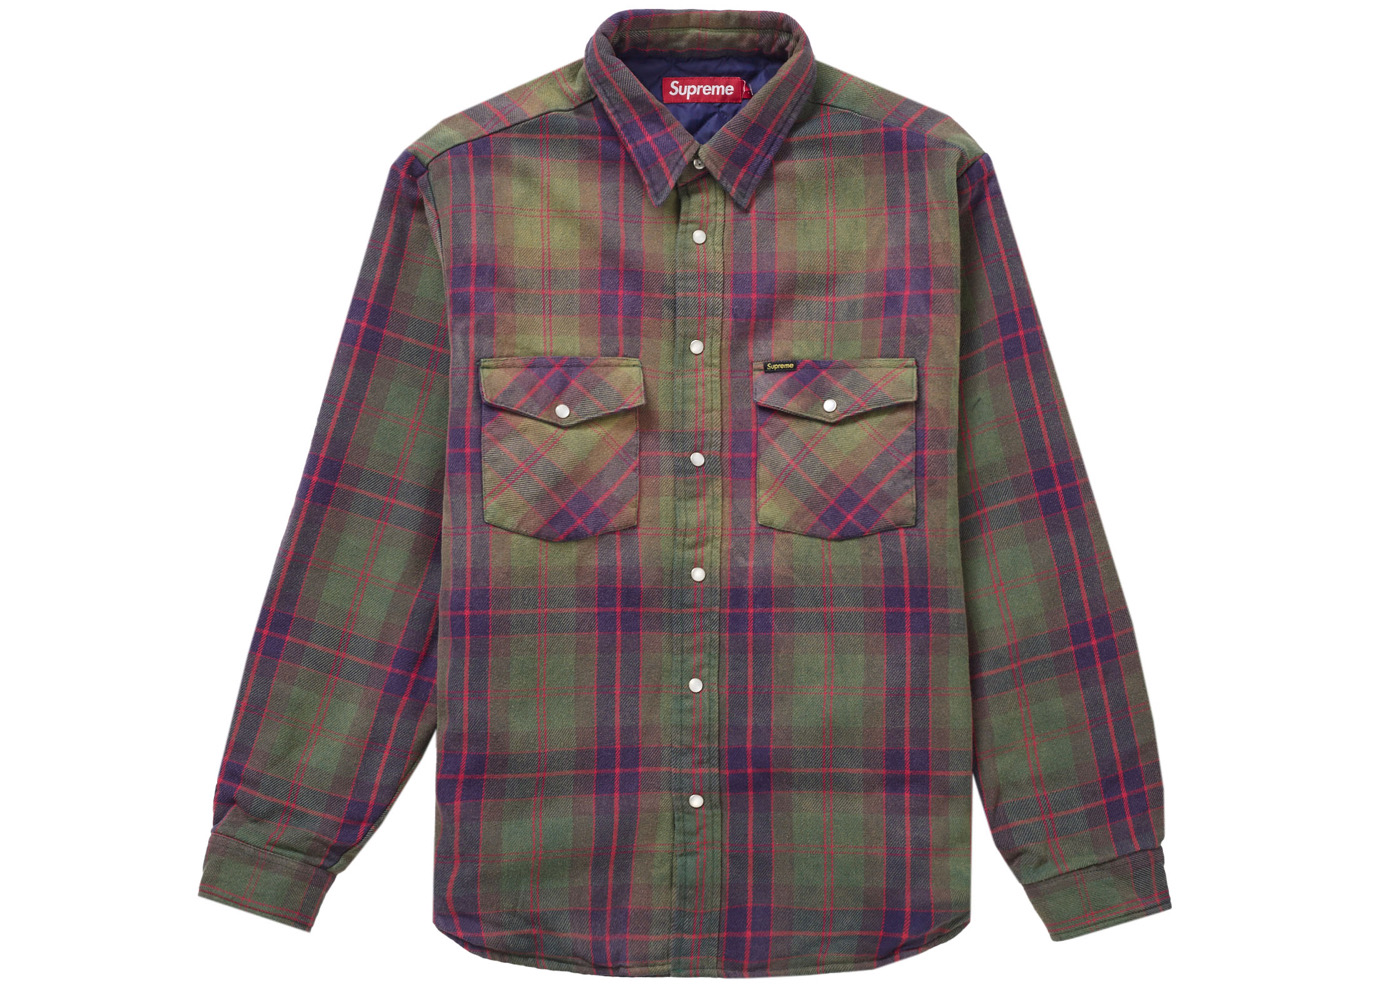 Qulted Flannel shirt